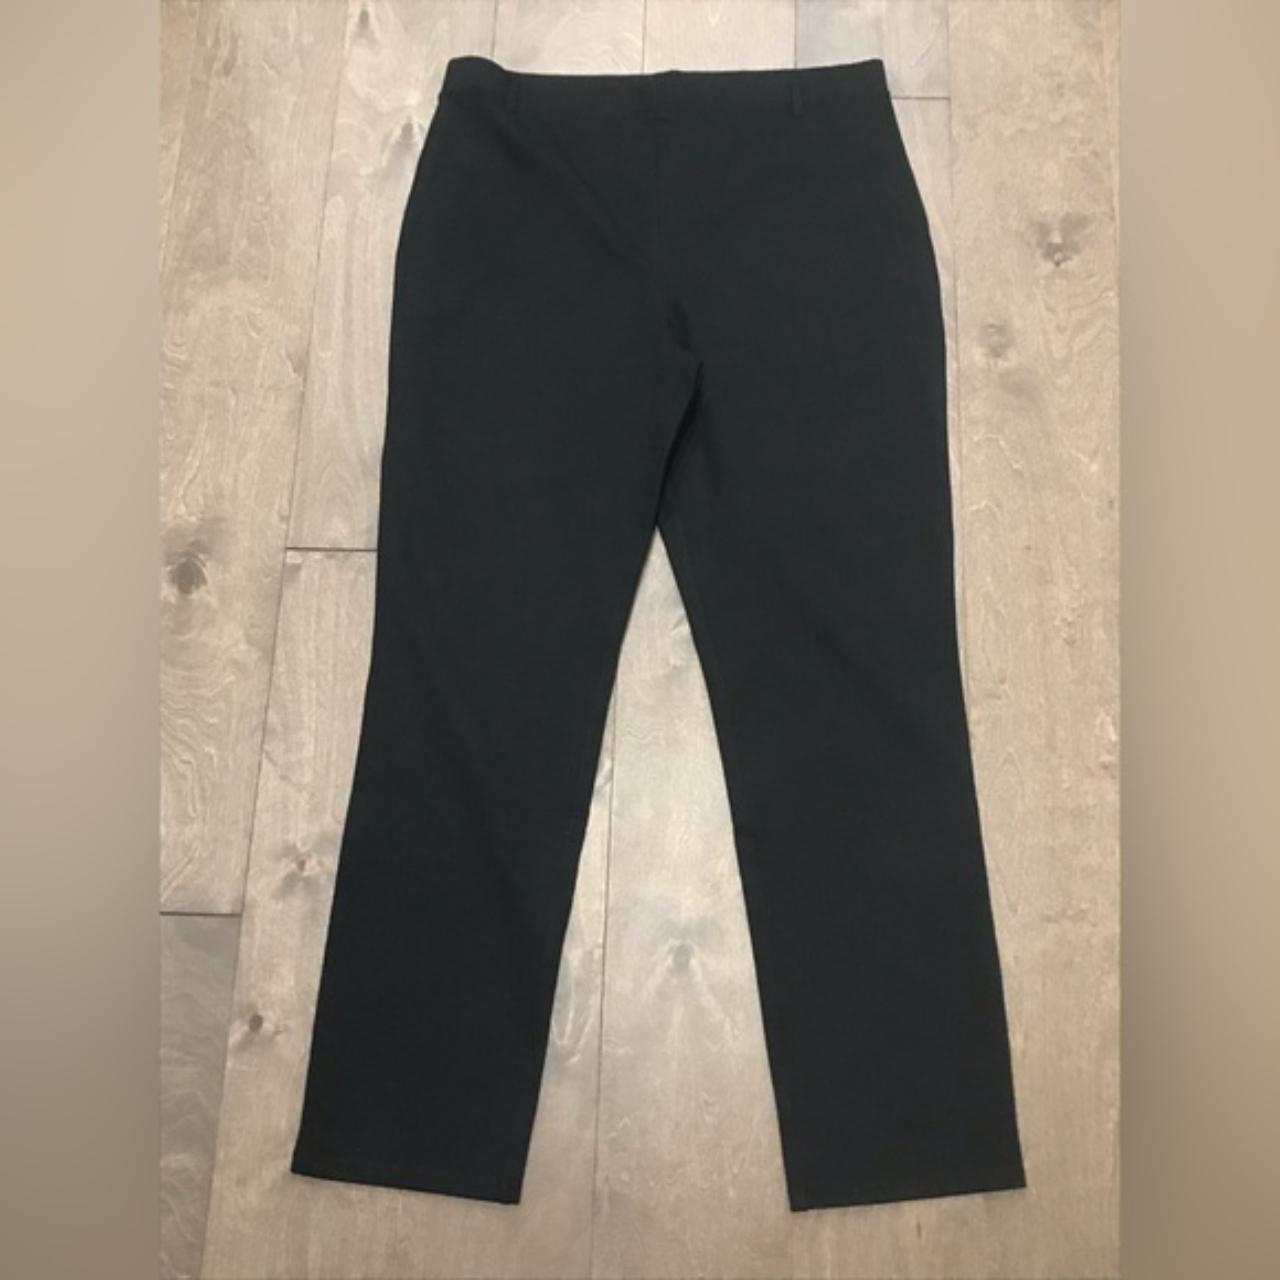 Quince Ultra-Stretch Ponte Straight Leg Pant in - Depop